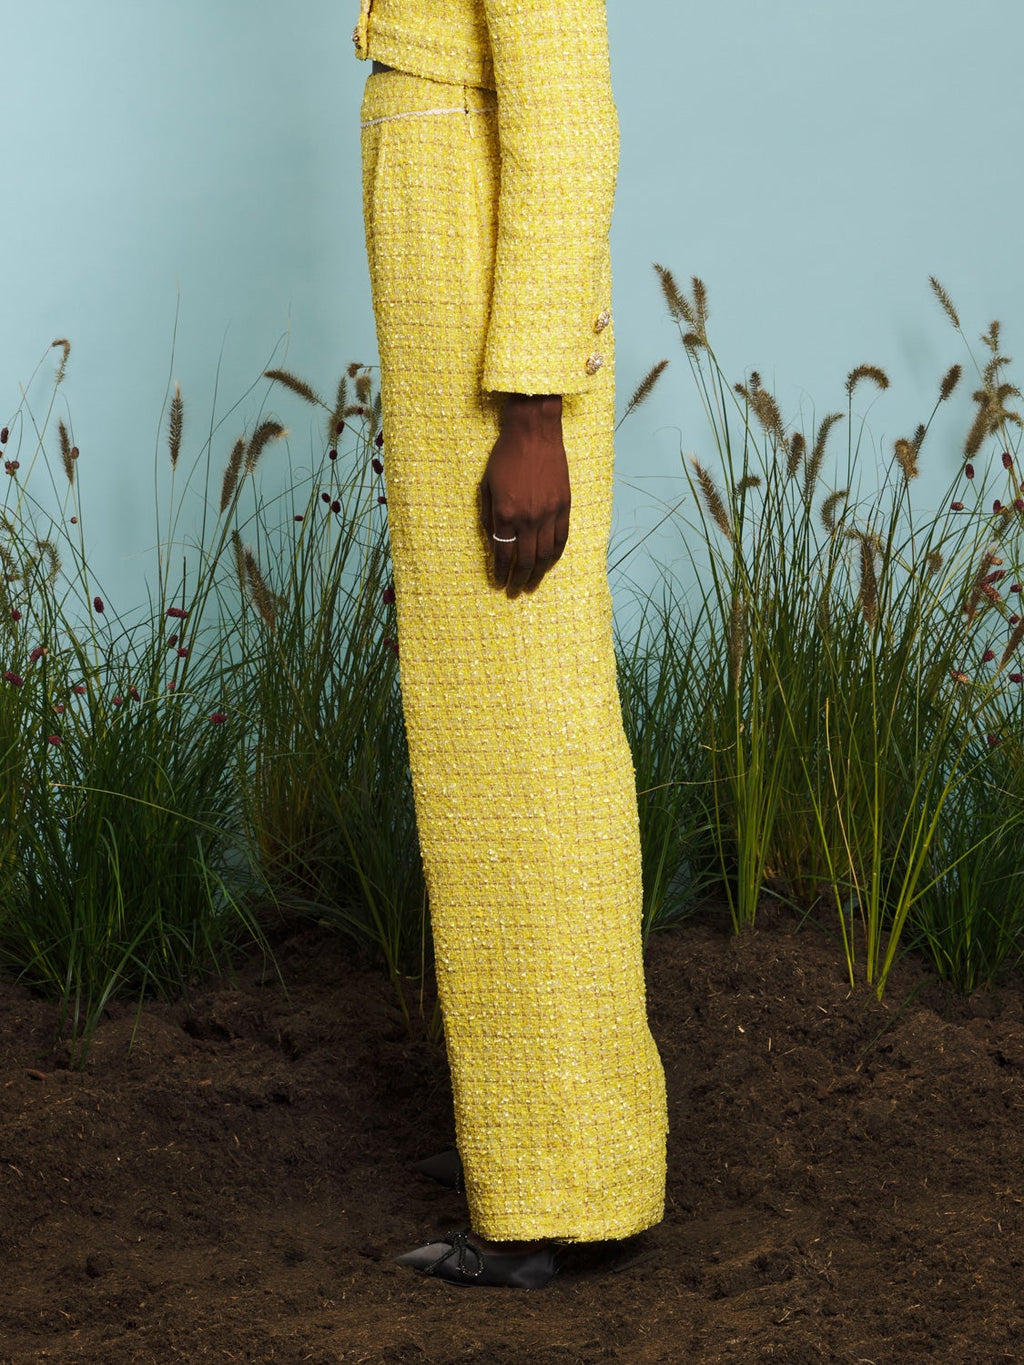 Sister Jane Maize tweed trousers, Your lungs filled with the fresh air of the land, you breathe in these vibrant high-waisted trousers in yellow textured tweed - they fit you like a Sunflower dream. Finished with scalloped edge trim detailing.